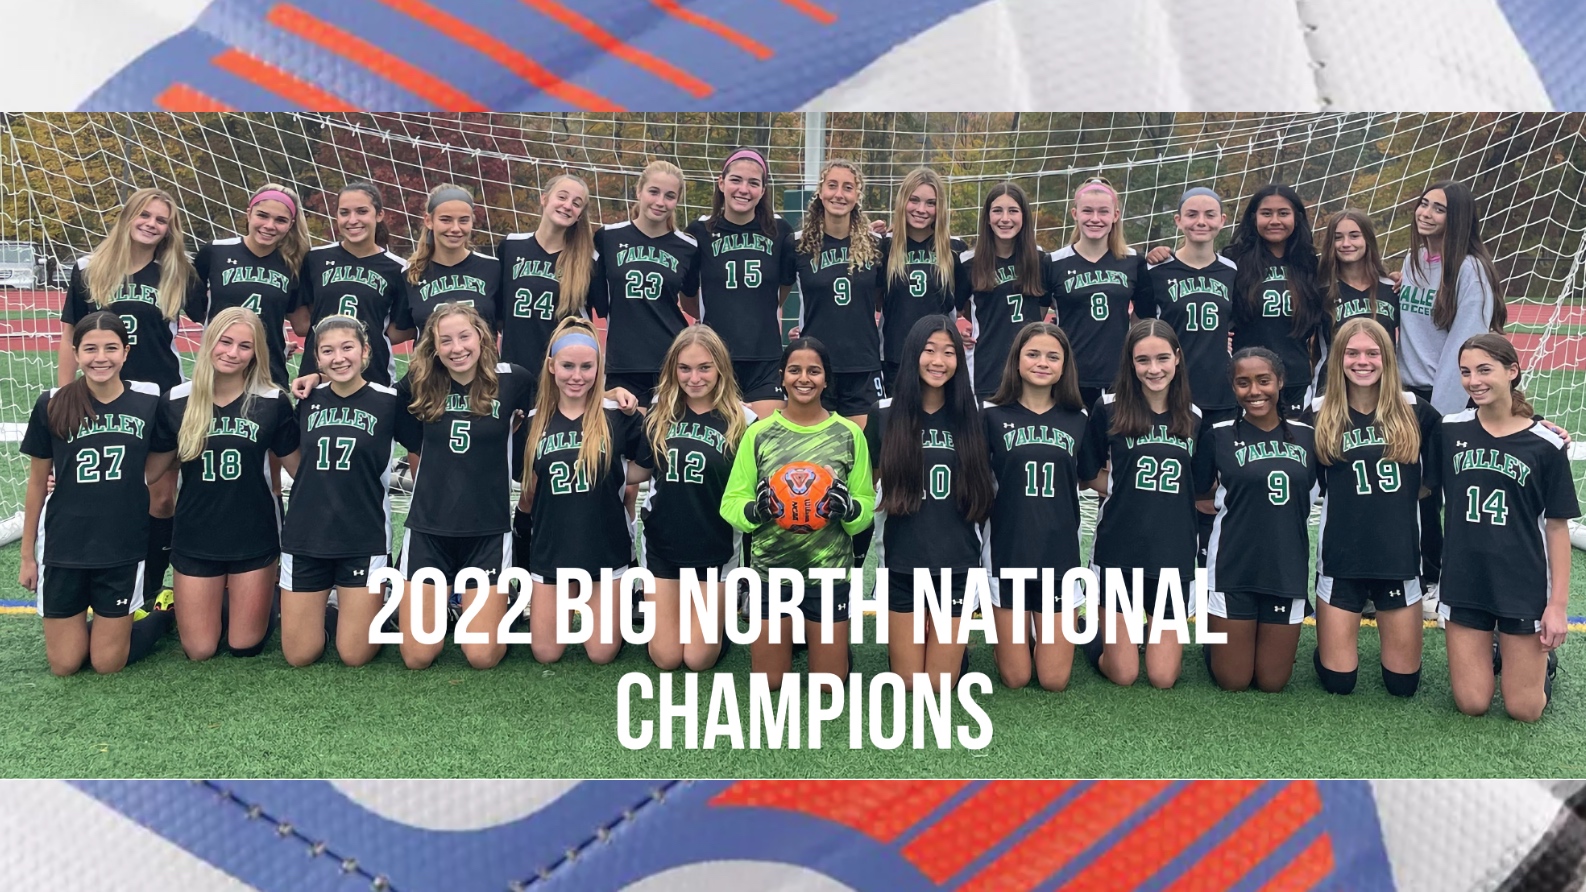 Holy Cross women's soccer team eyeing 2nd national championship title